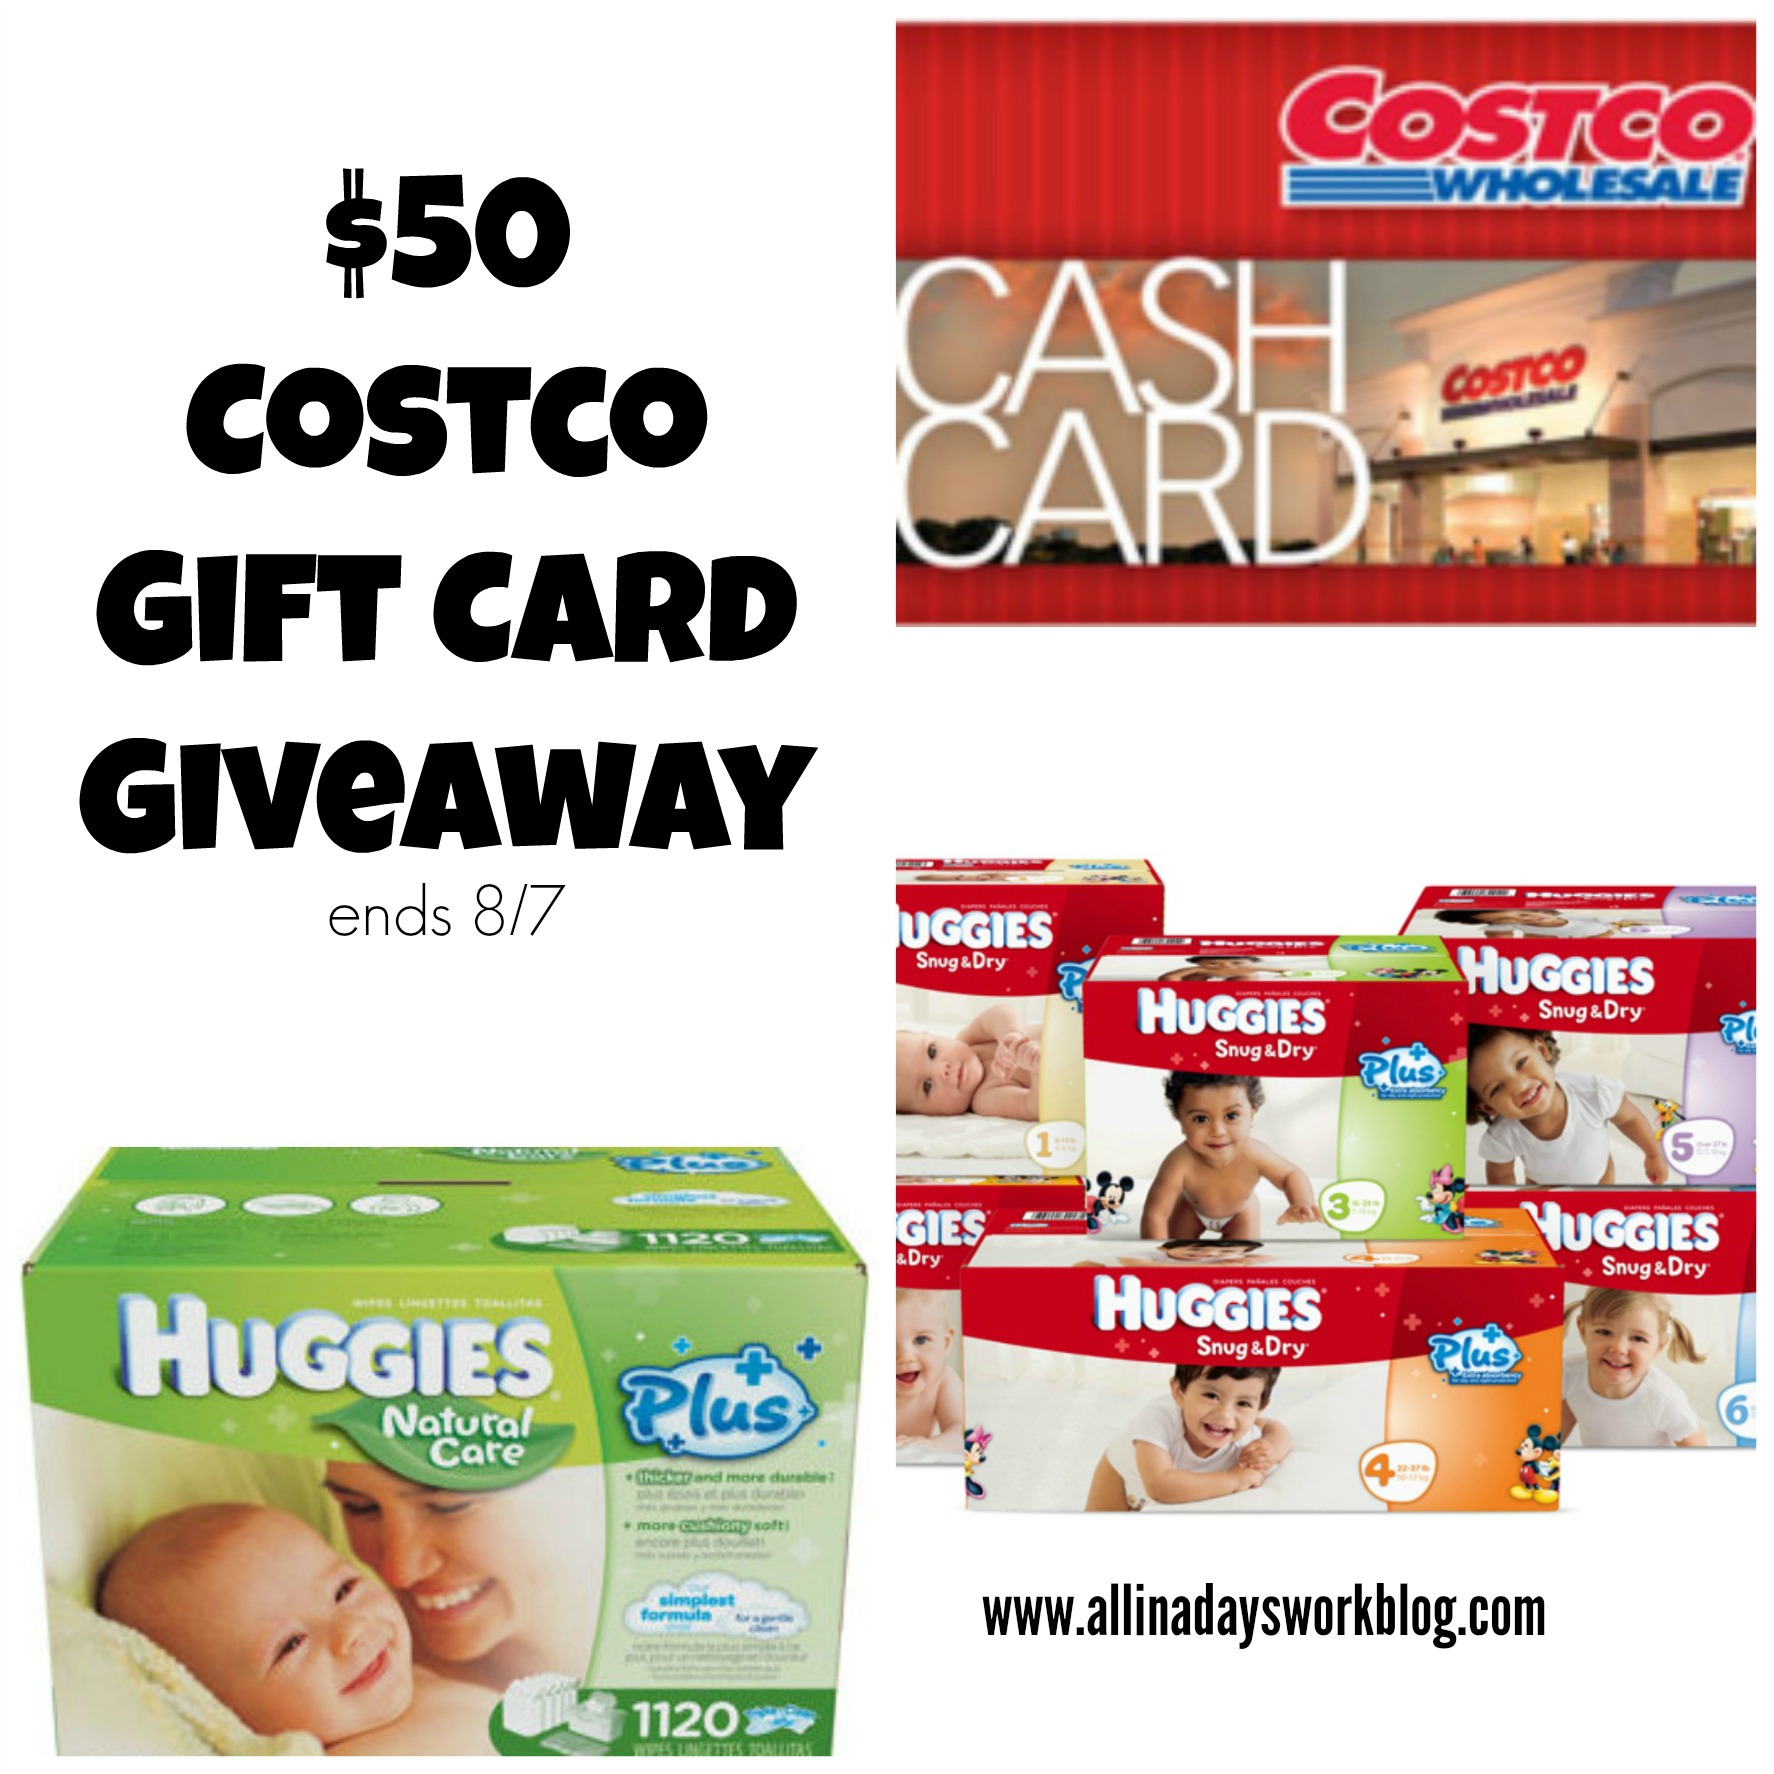 try-huggies-snug-dry-diapers-with-a-50-costco-gift-card-giveaway